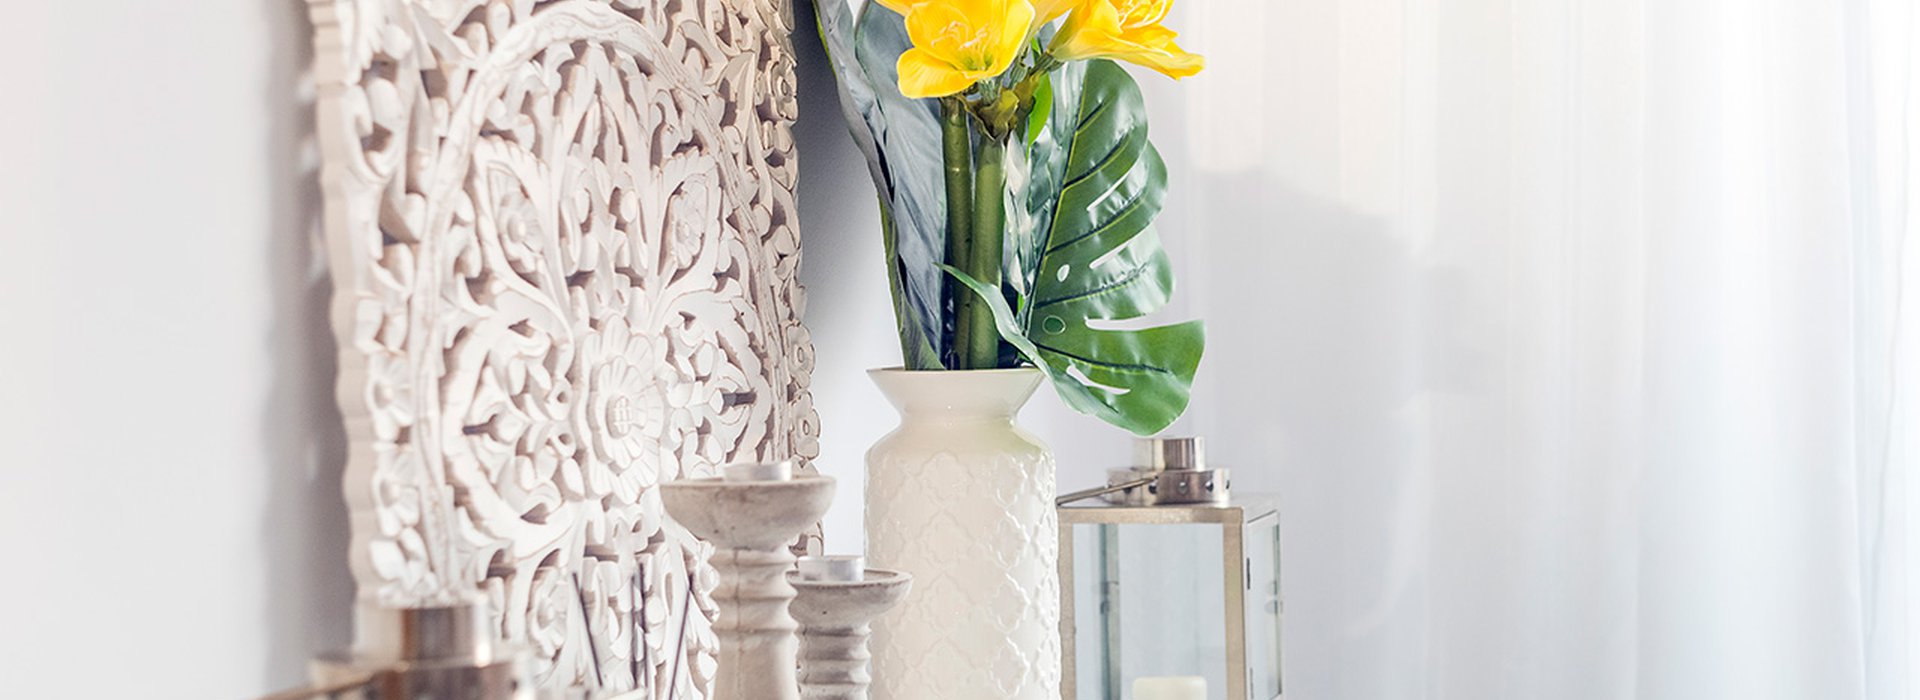 Yellow flowers in ceramic vase with wooden candlesticks and lantern decorating a shelf